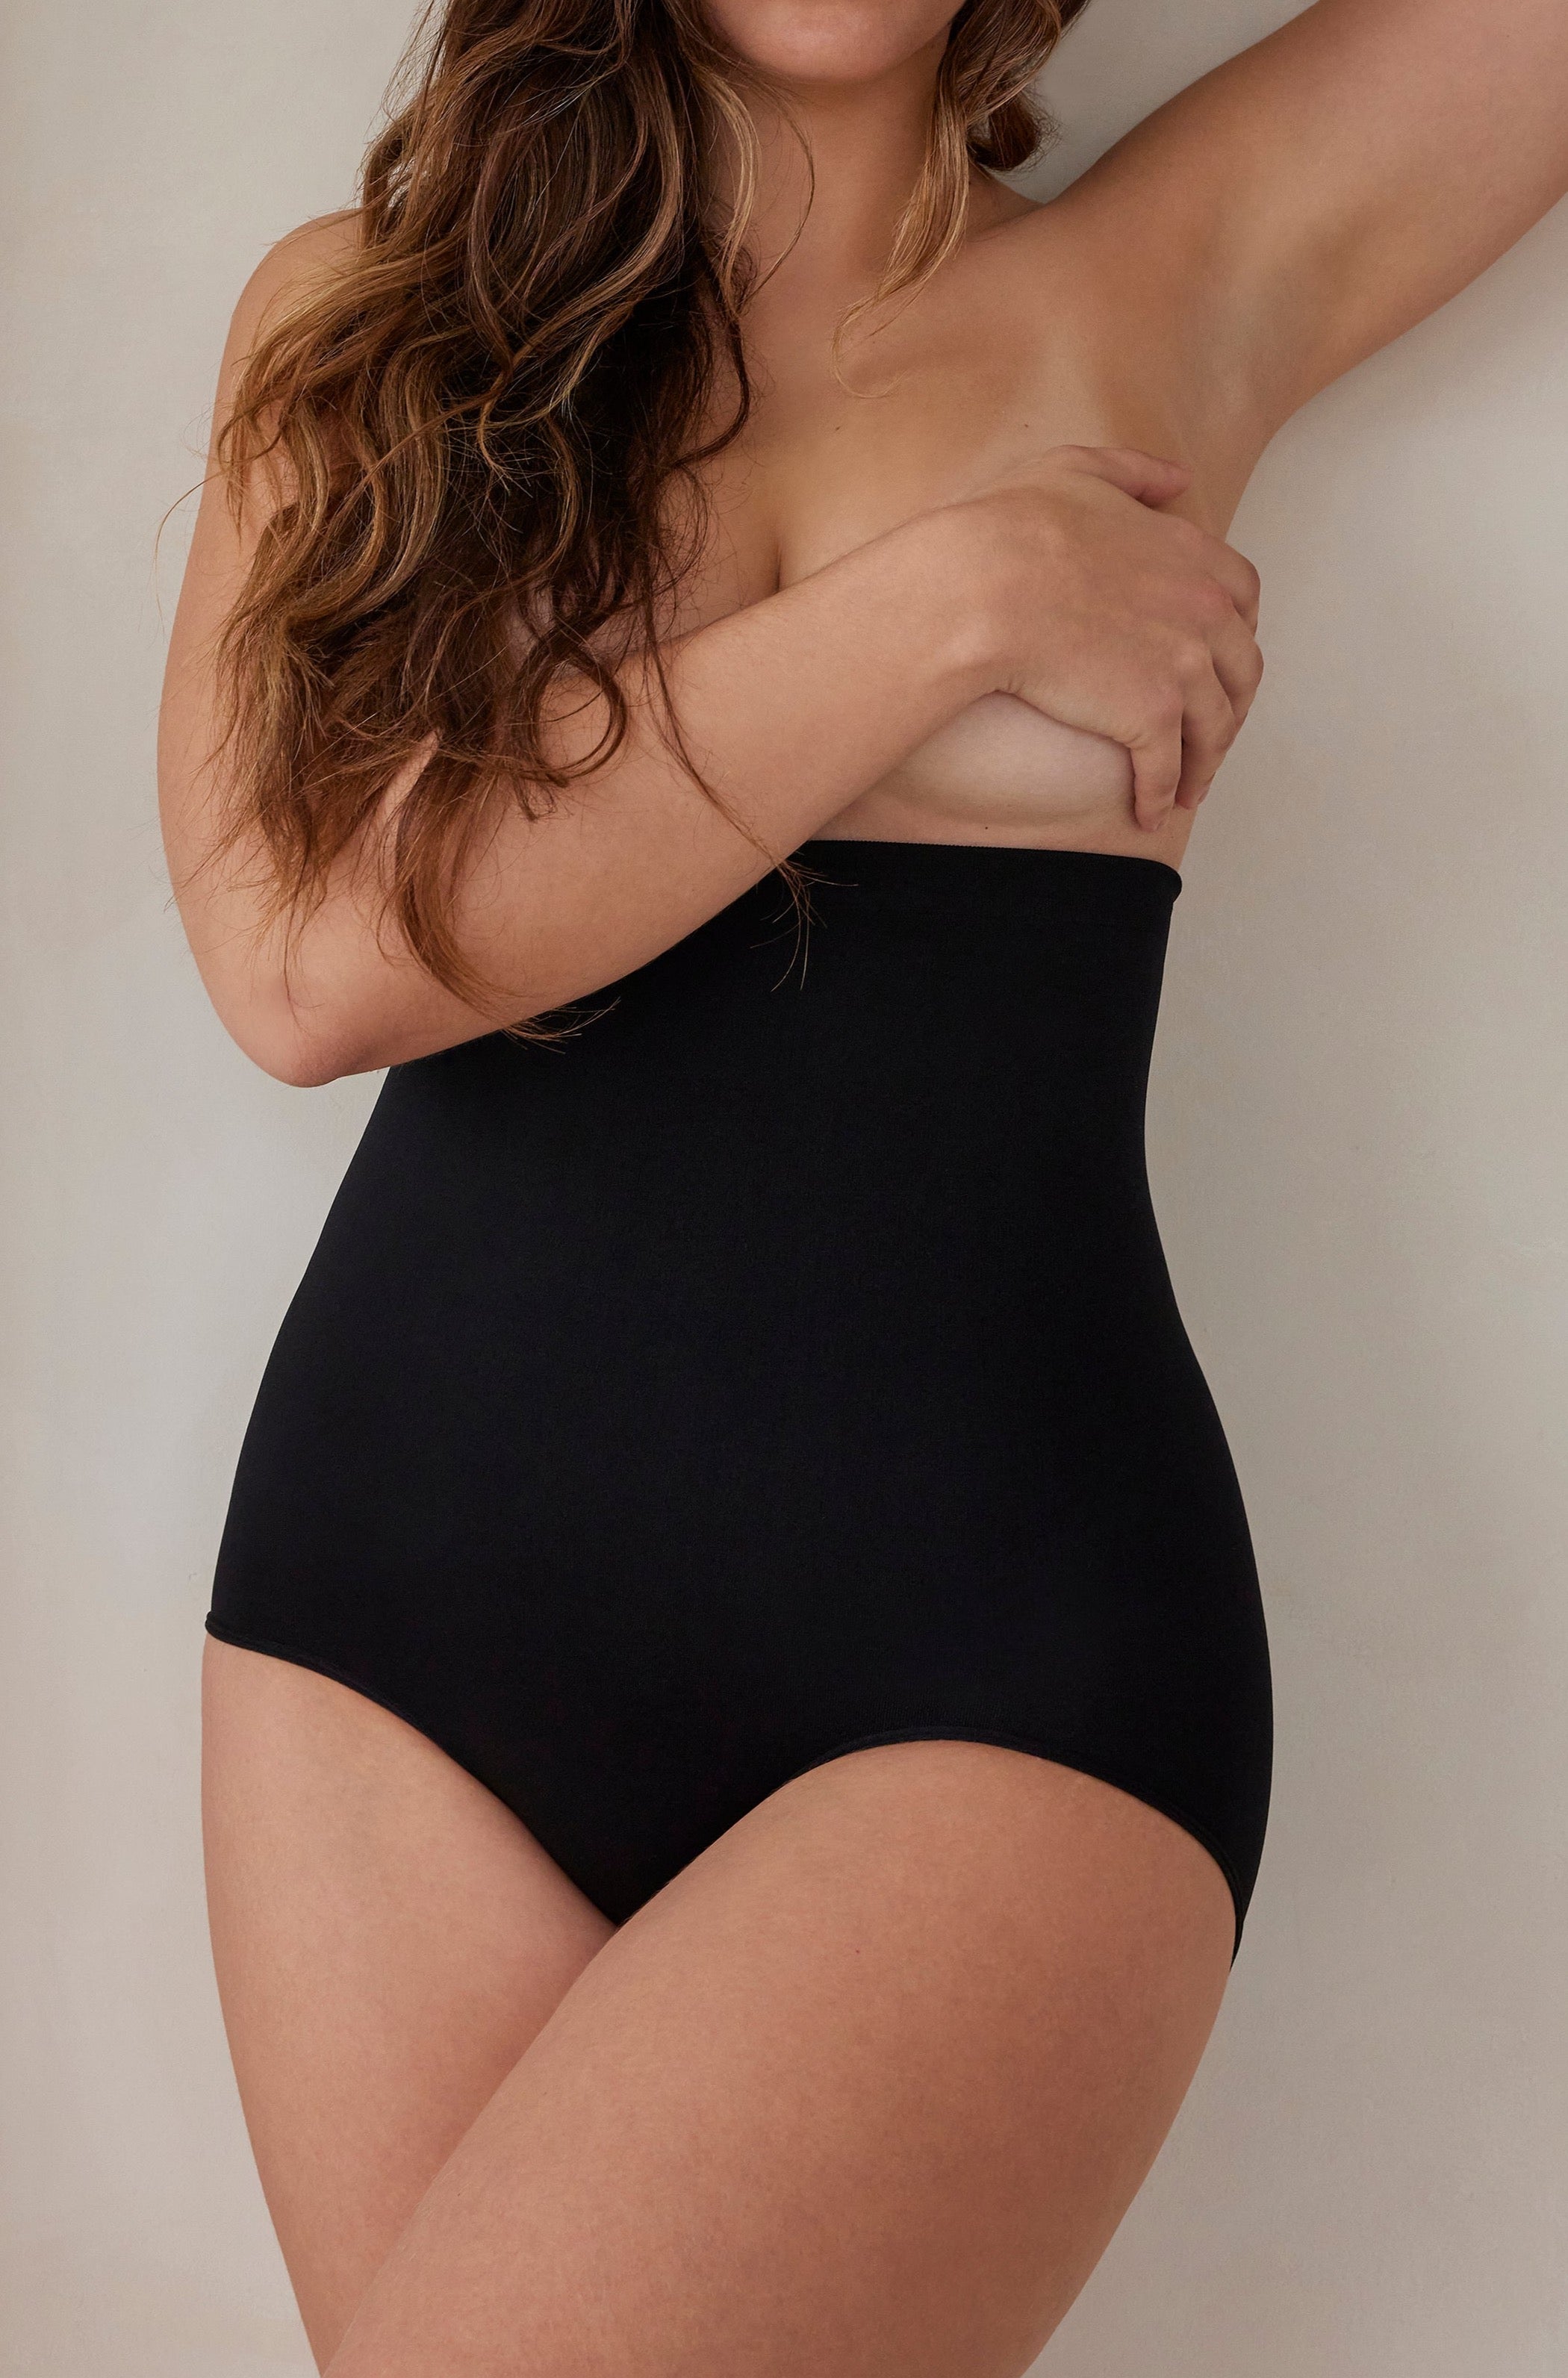 Shop The Support Compression Brief, Women's Shapewear Brief